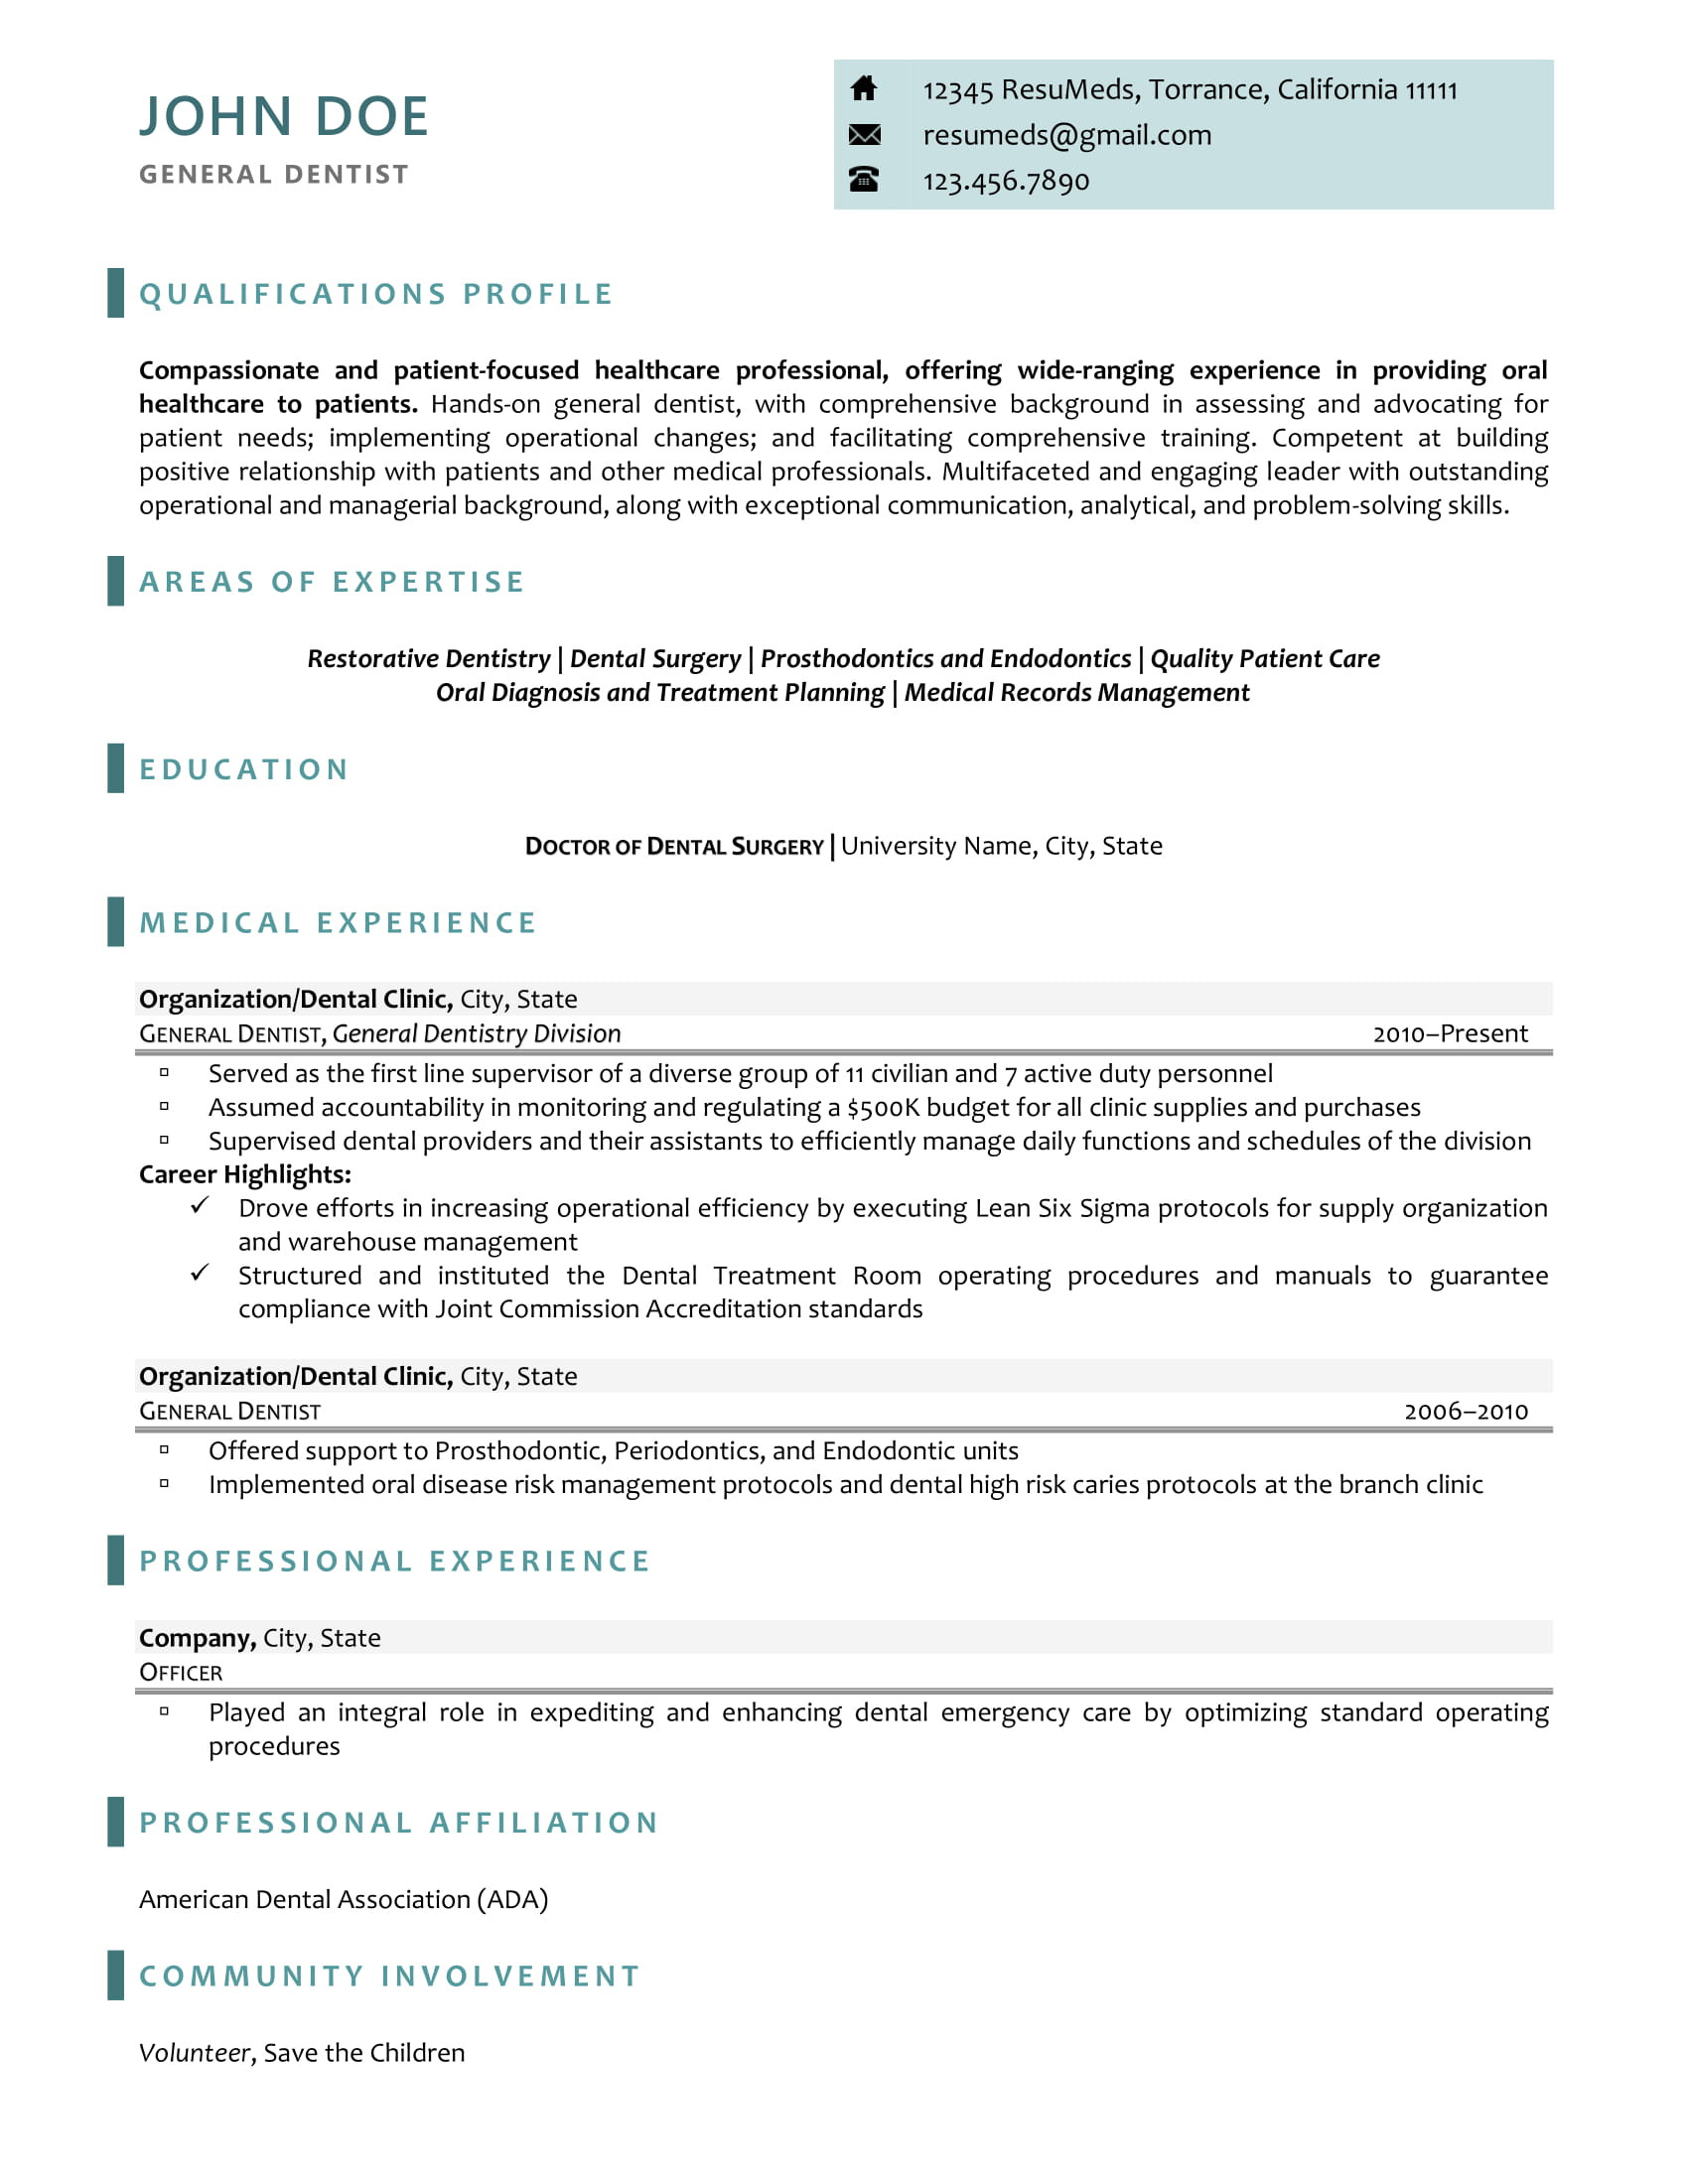 Sample Resume In the Healthcare Field Medical Cv Examples Healthcare Cv Examples Resumeds